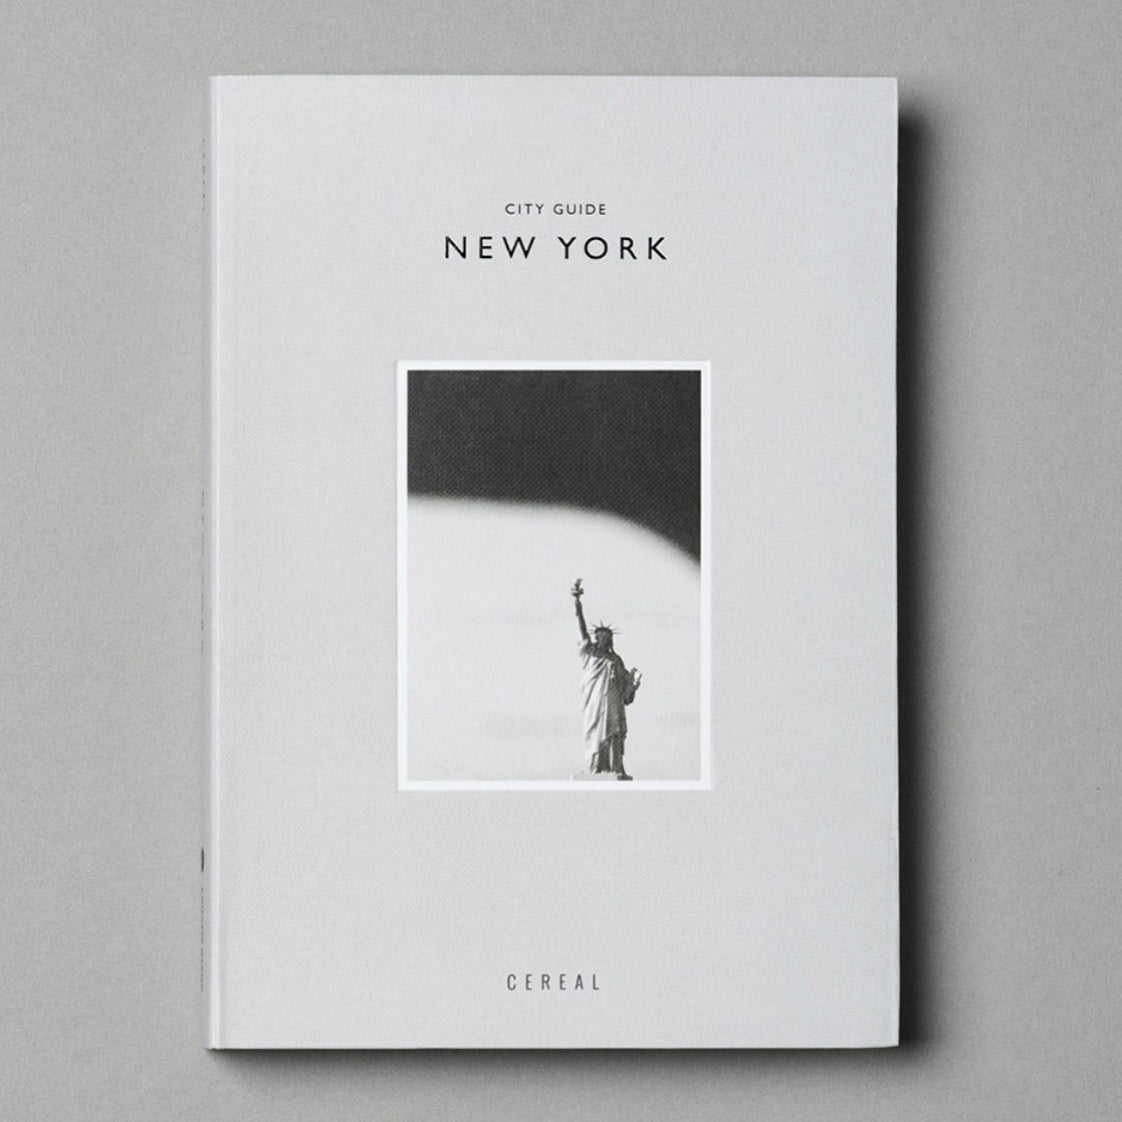 CEREAL CITY GUIDE: NEW YORK